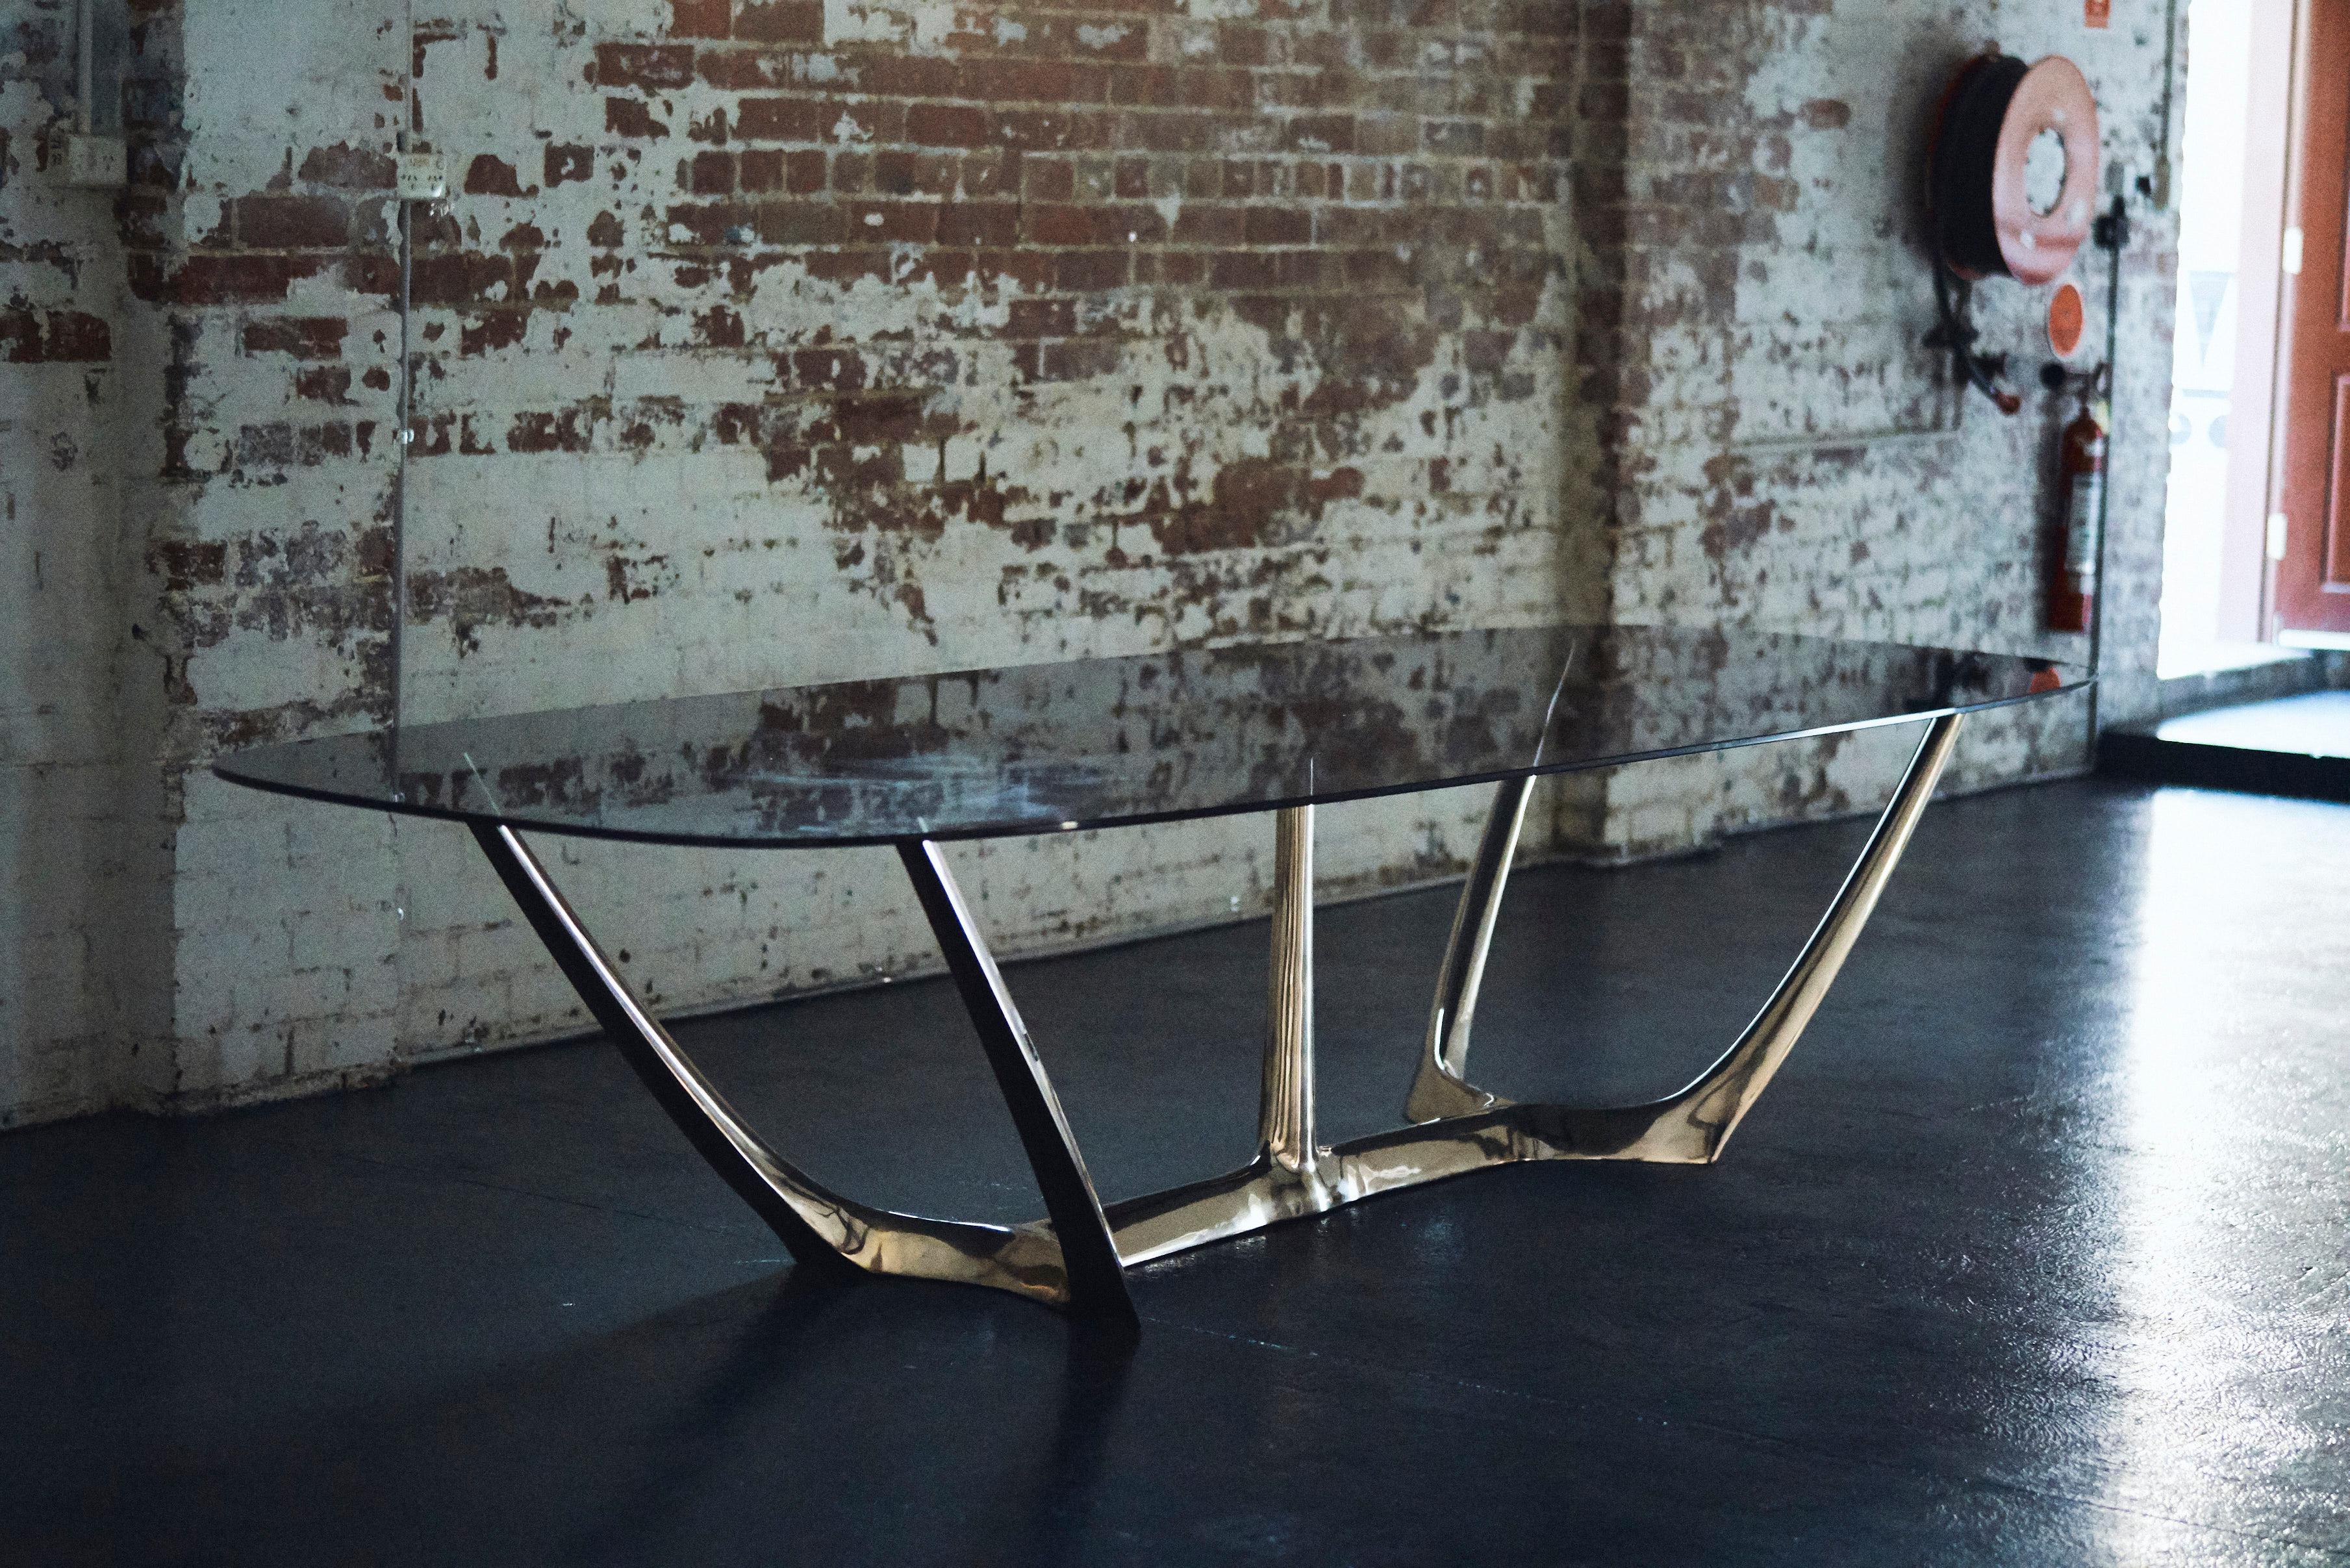 The great dining table is a stunning piece of furniture that showcases the craftsmanship and creativity of Australian designer Daniel Barbera. Barbera has been working with bronze for over a decade, exploring its organic and fluid qualities. He